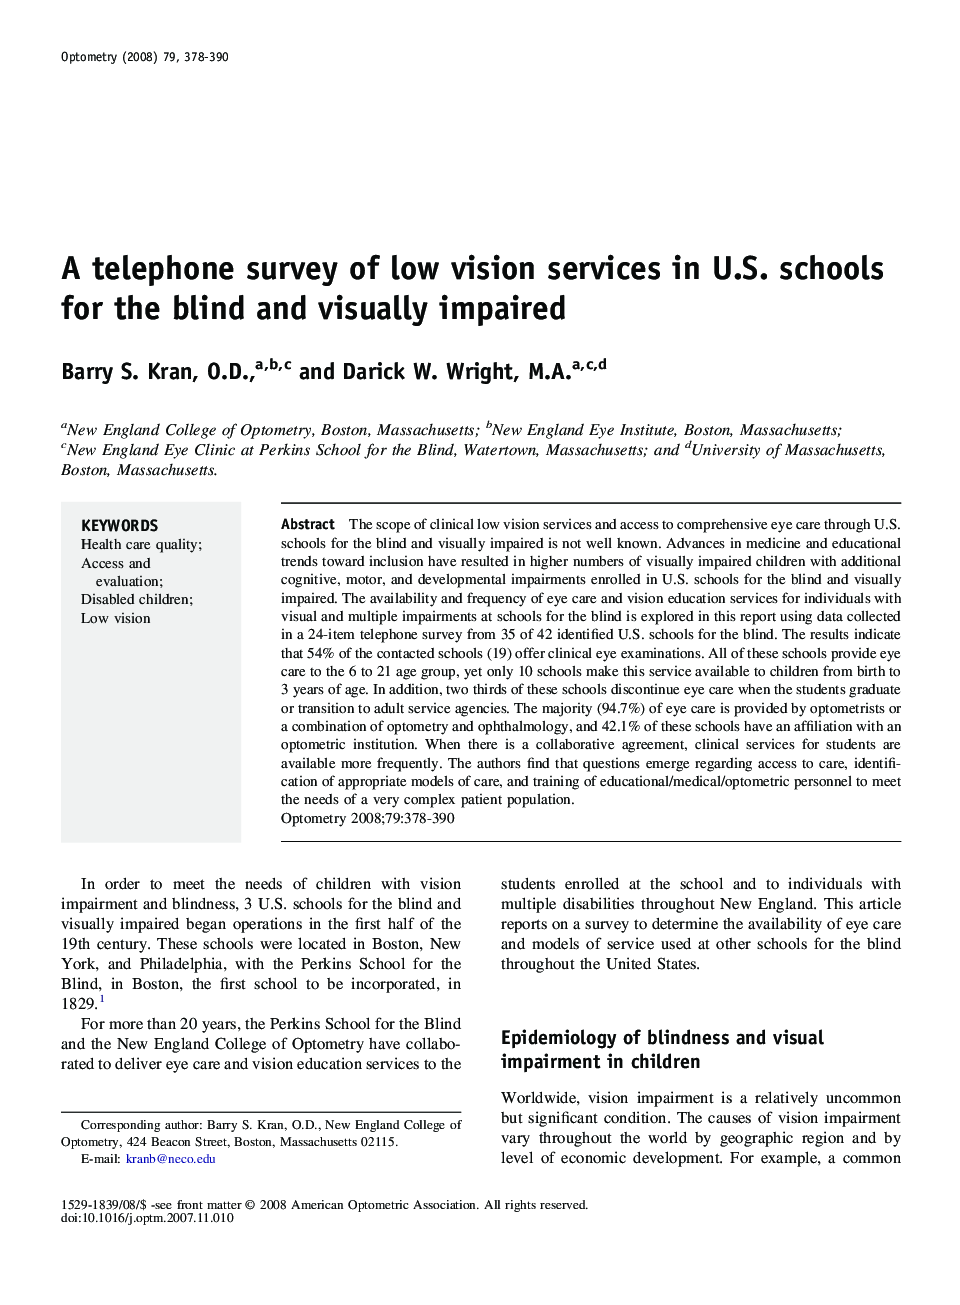 A telephone survey of low vision services in U.S. schools for the blind and visually impaired